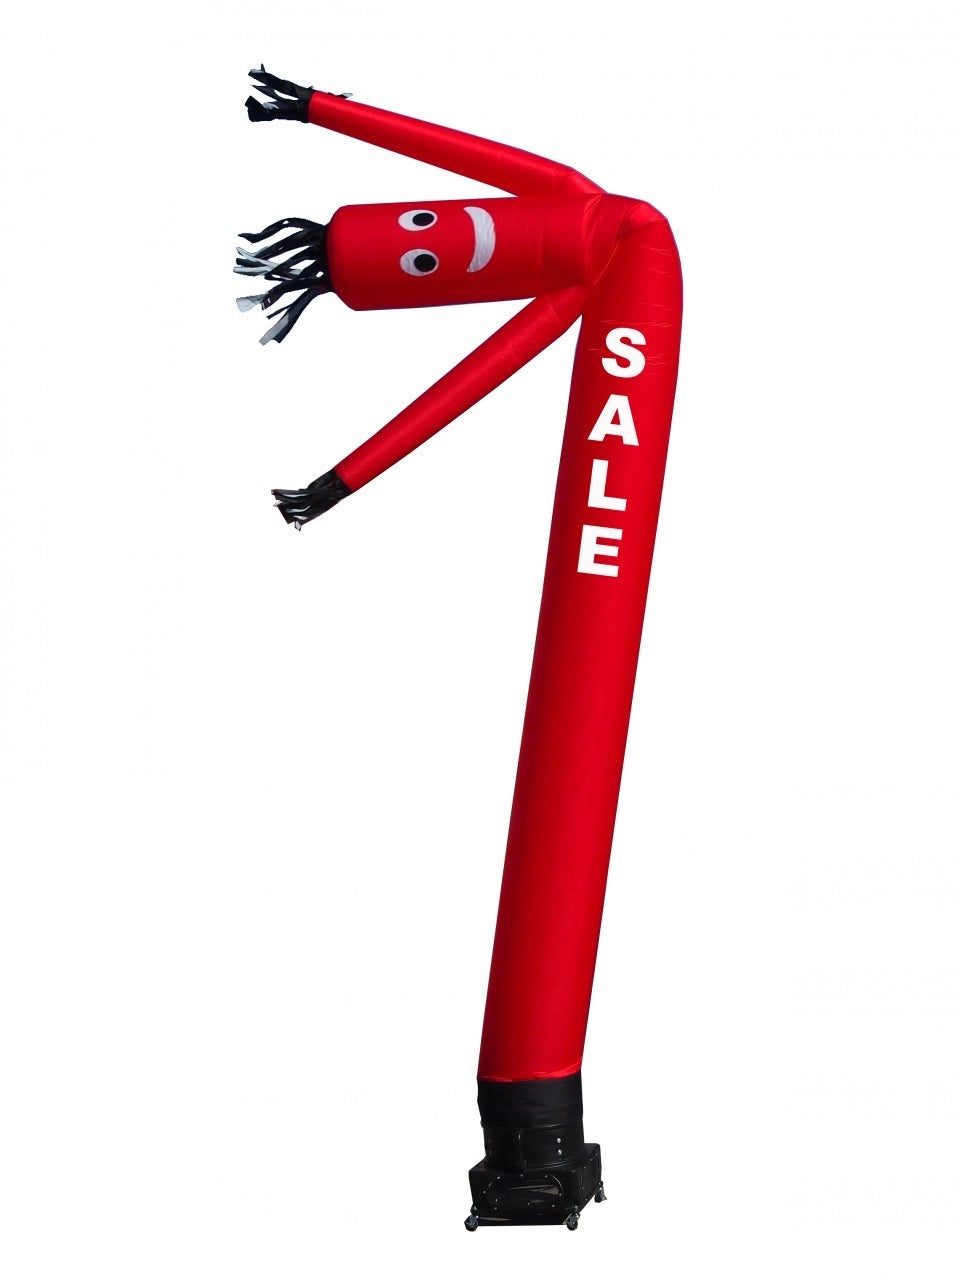 20ft Sale Red Air Dancer Tube Man Wacky Wavy Inflatables